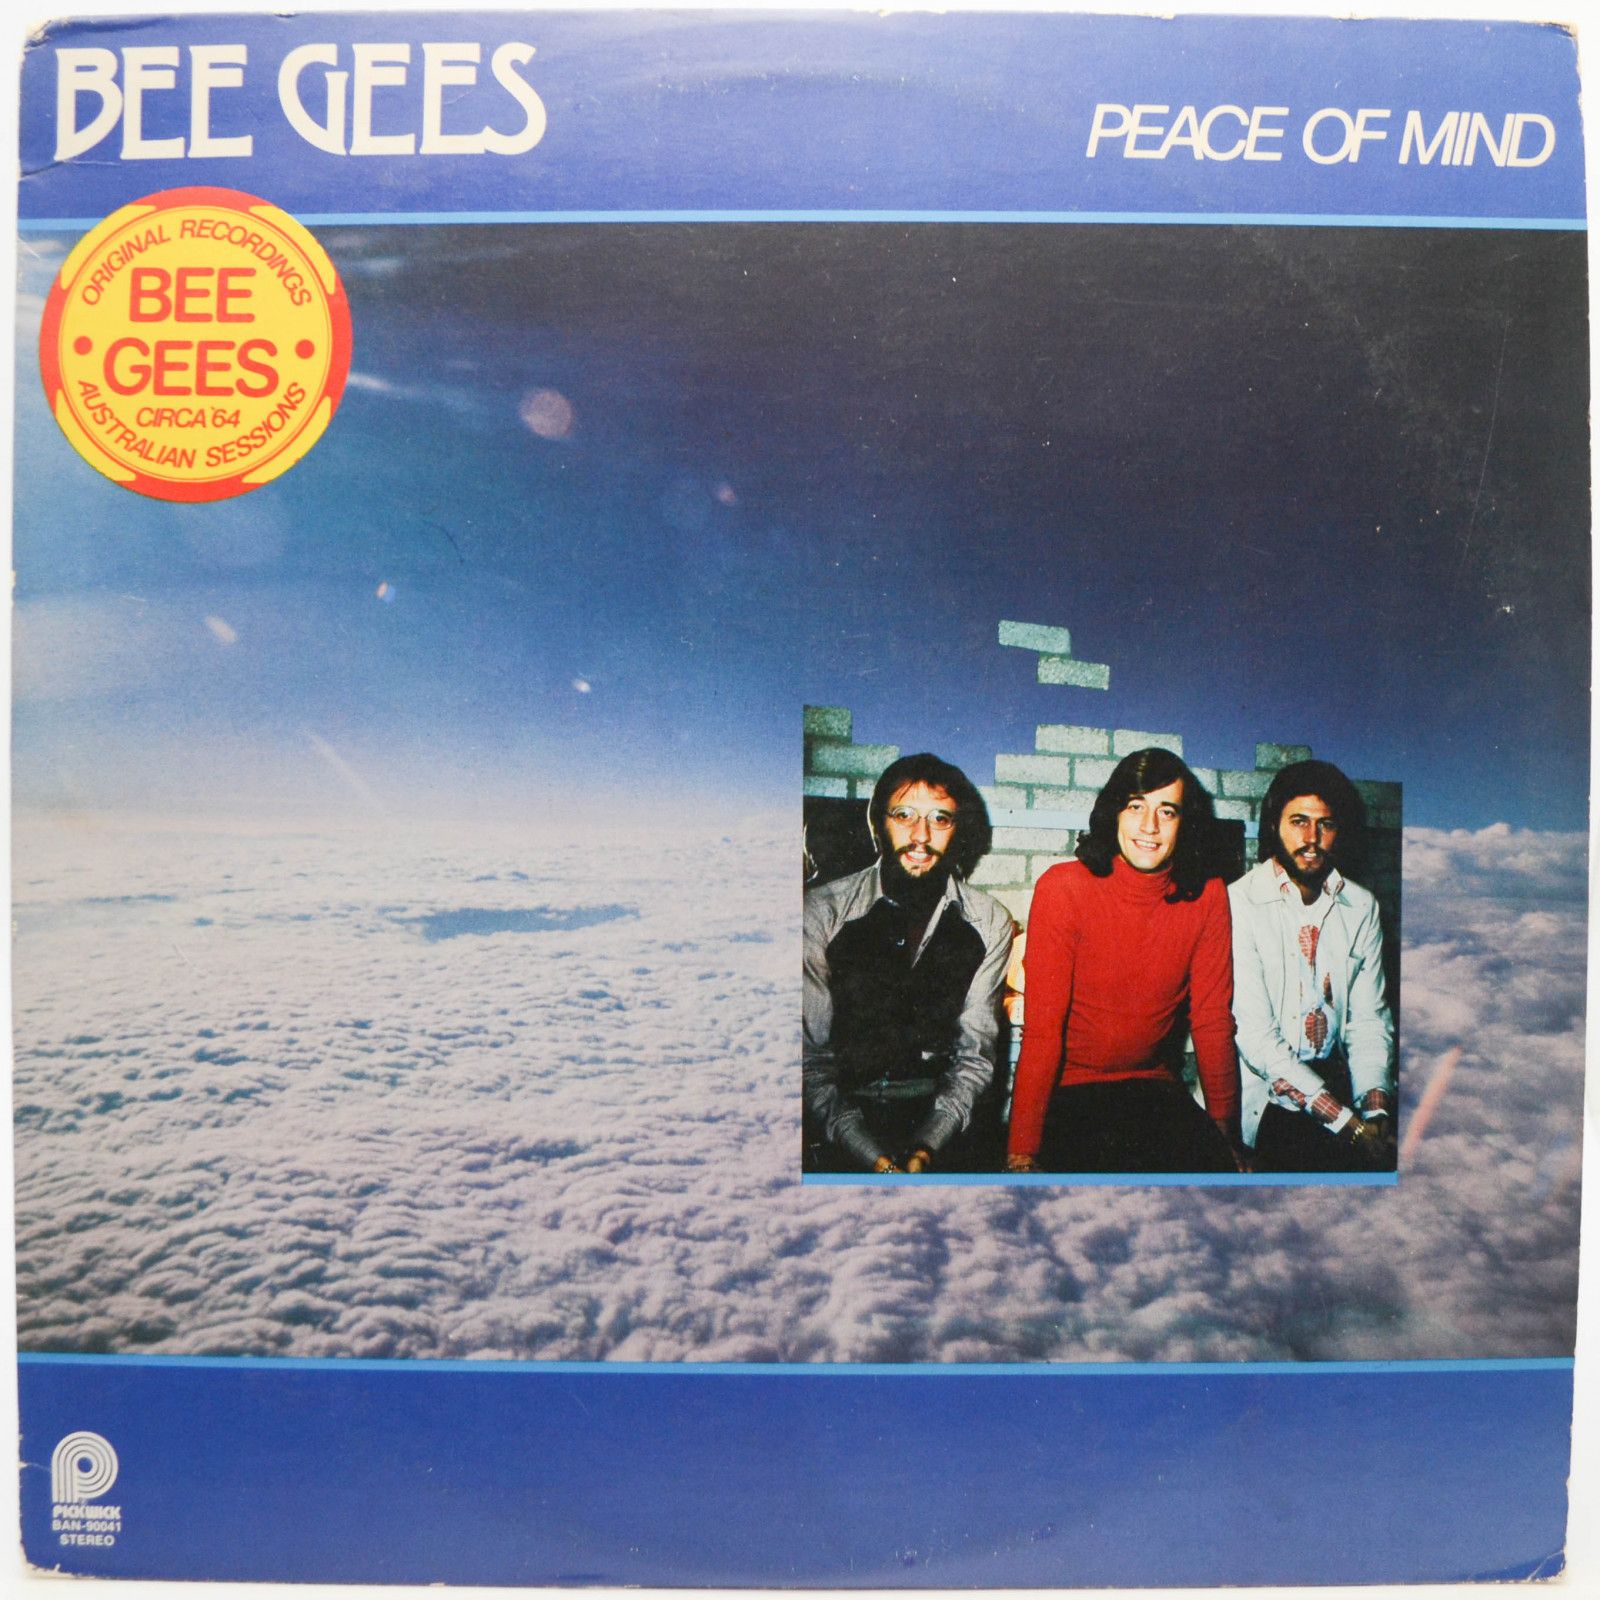 Bee Gees — Peace Of Mind (USA), 1978